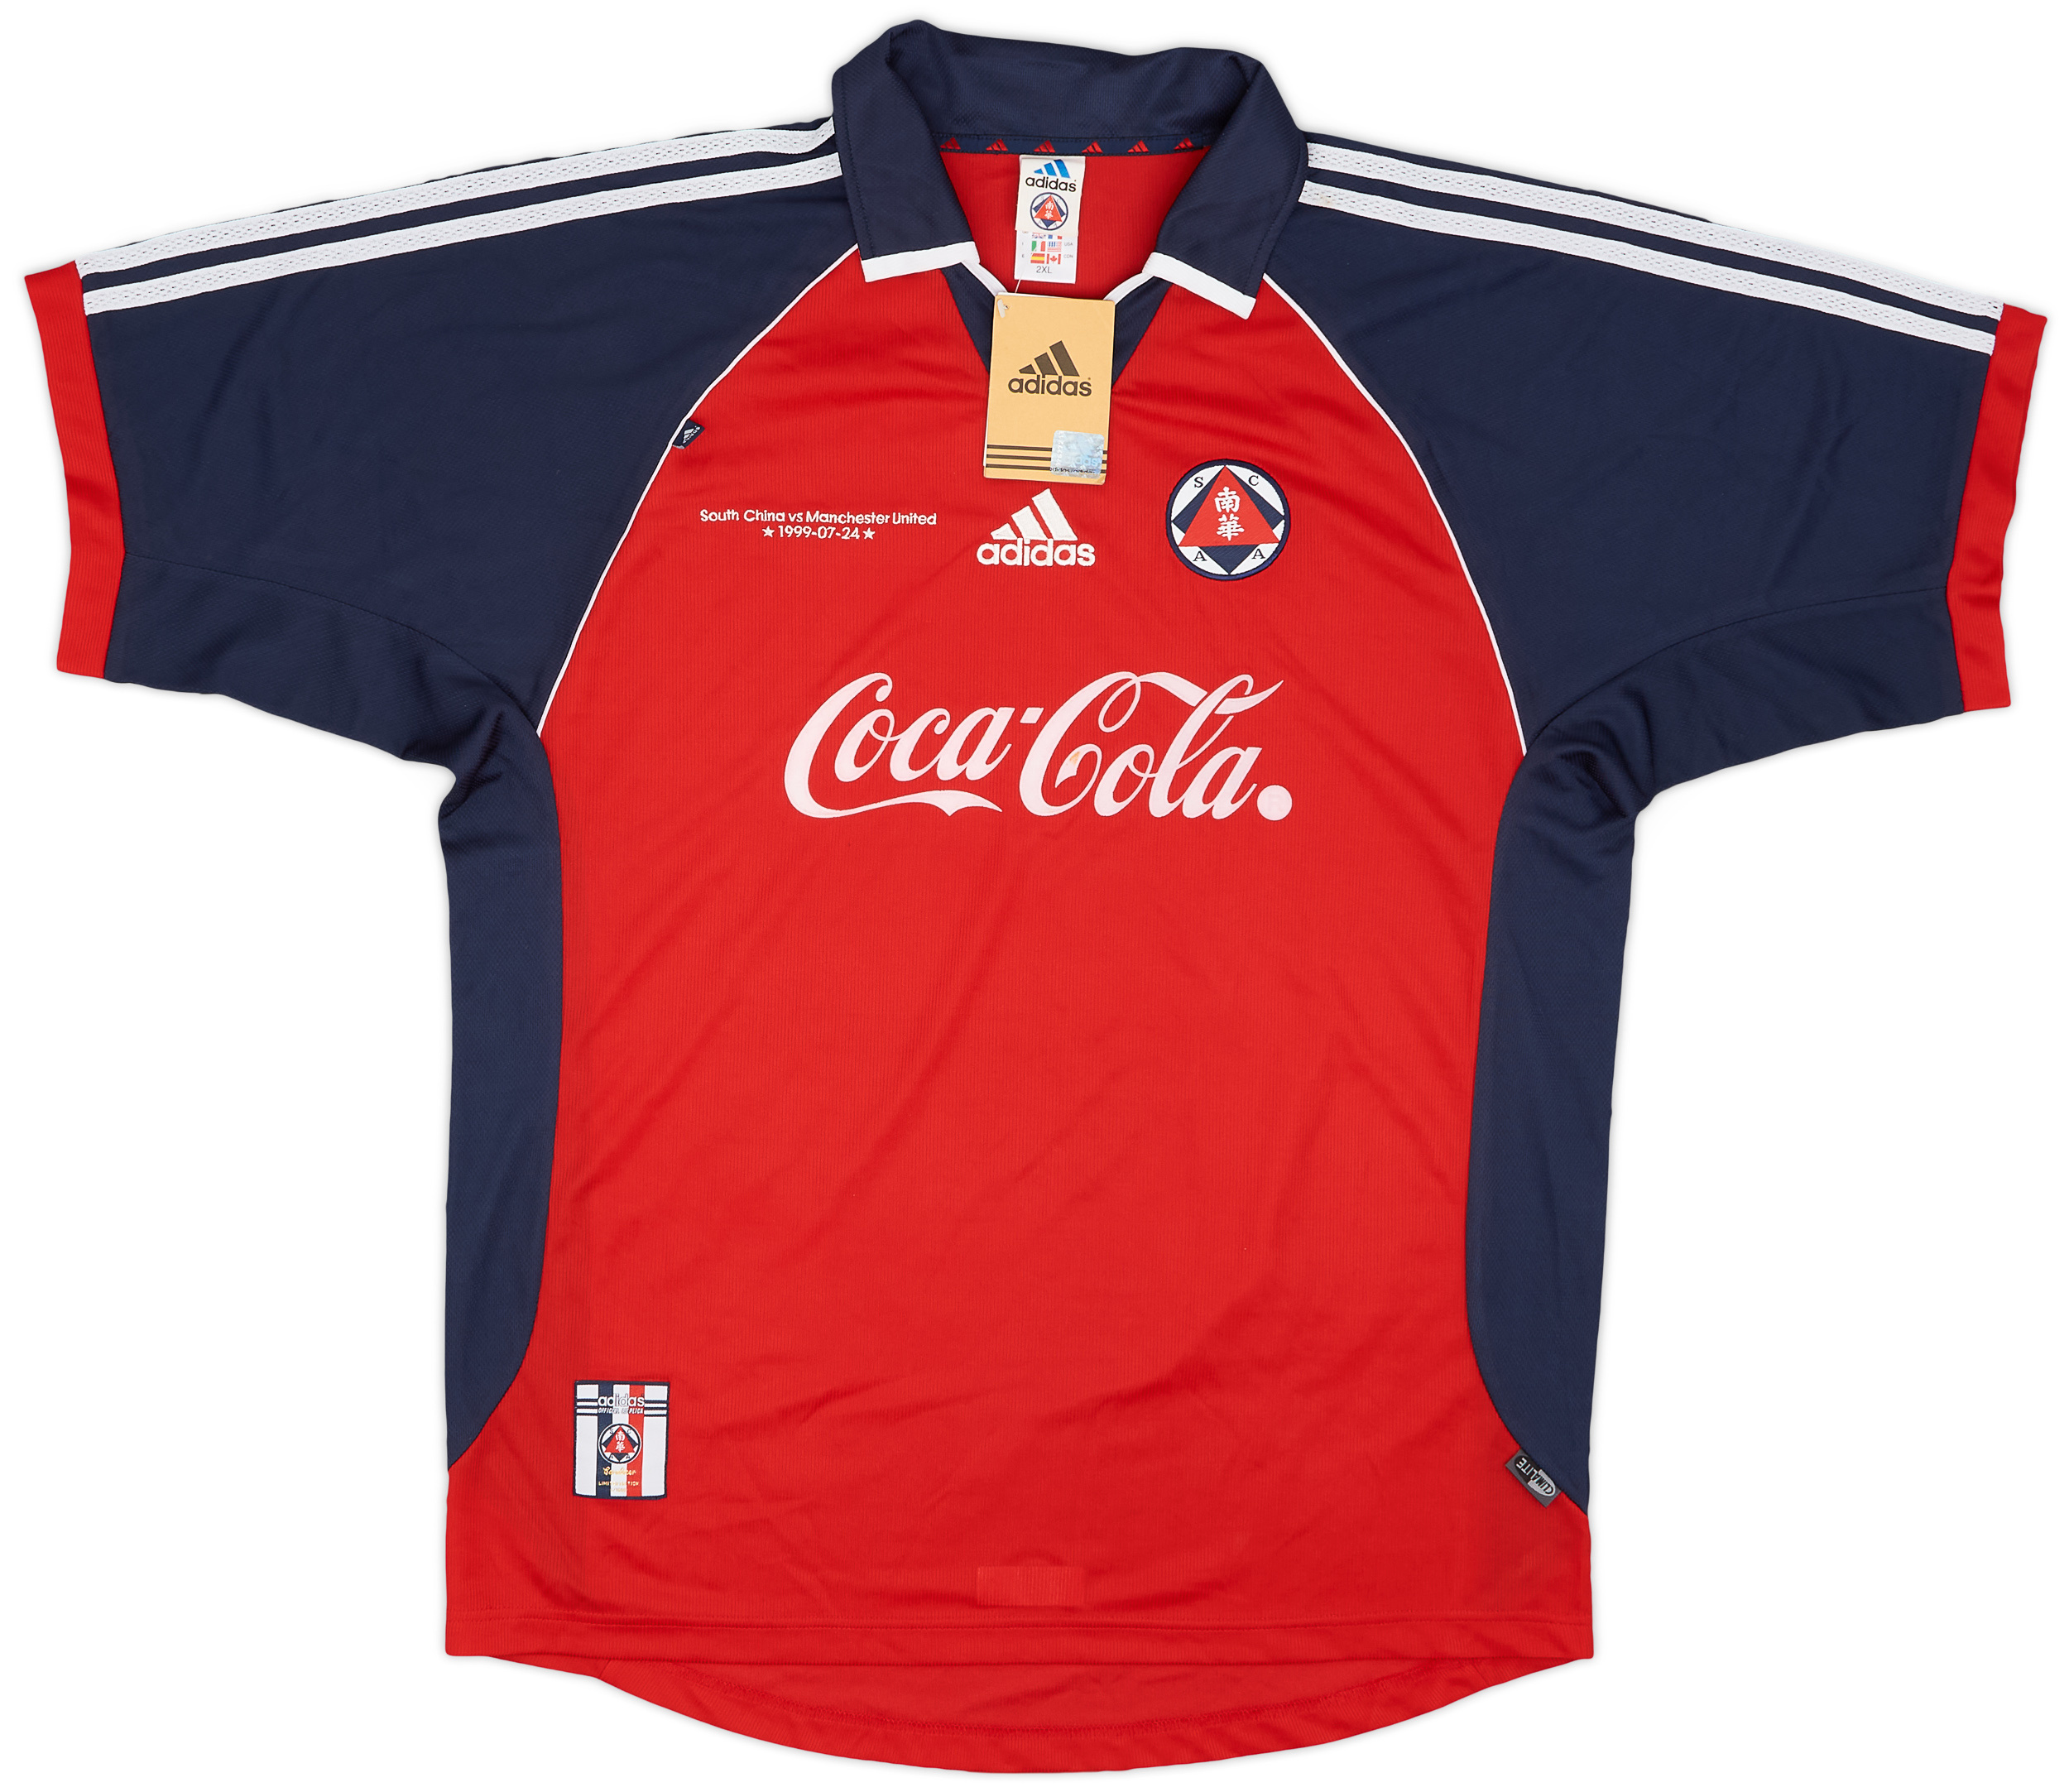 1999-00 South China 'vs. Manchester United' Special Shirt ()